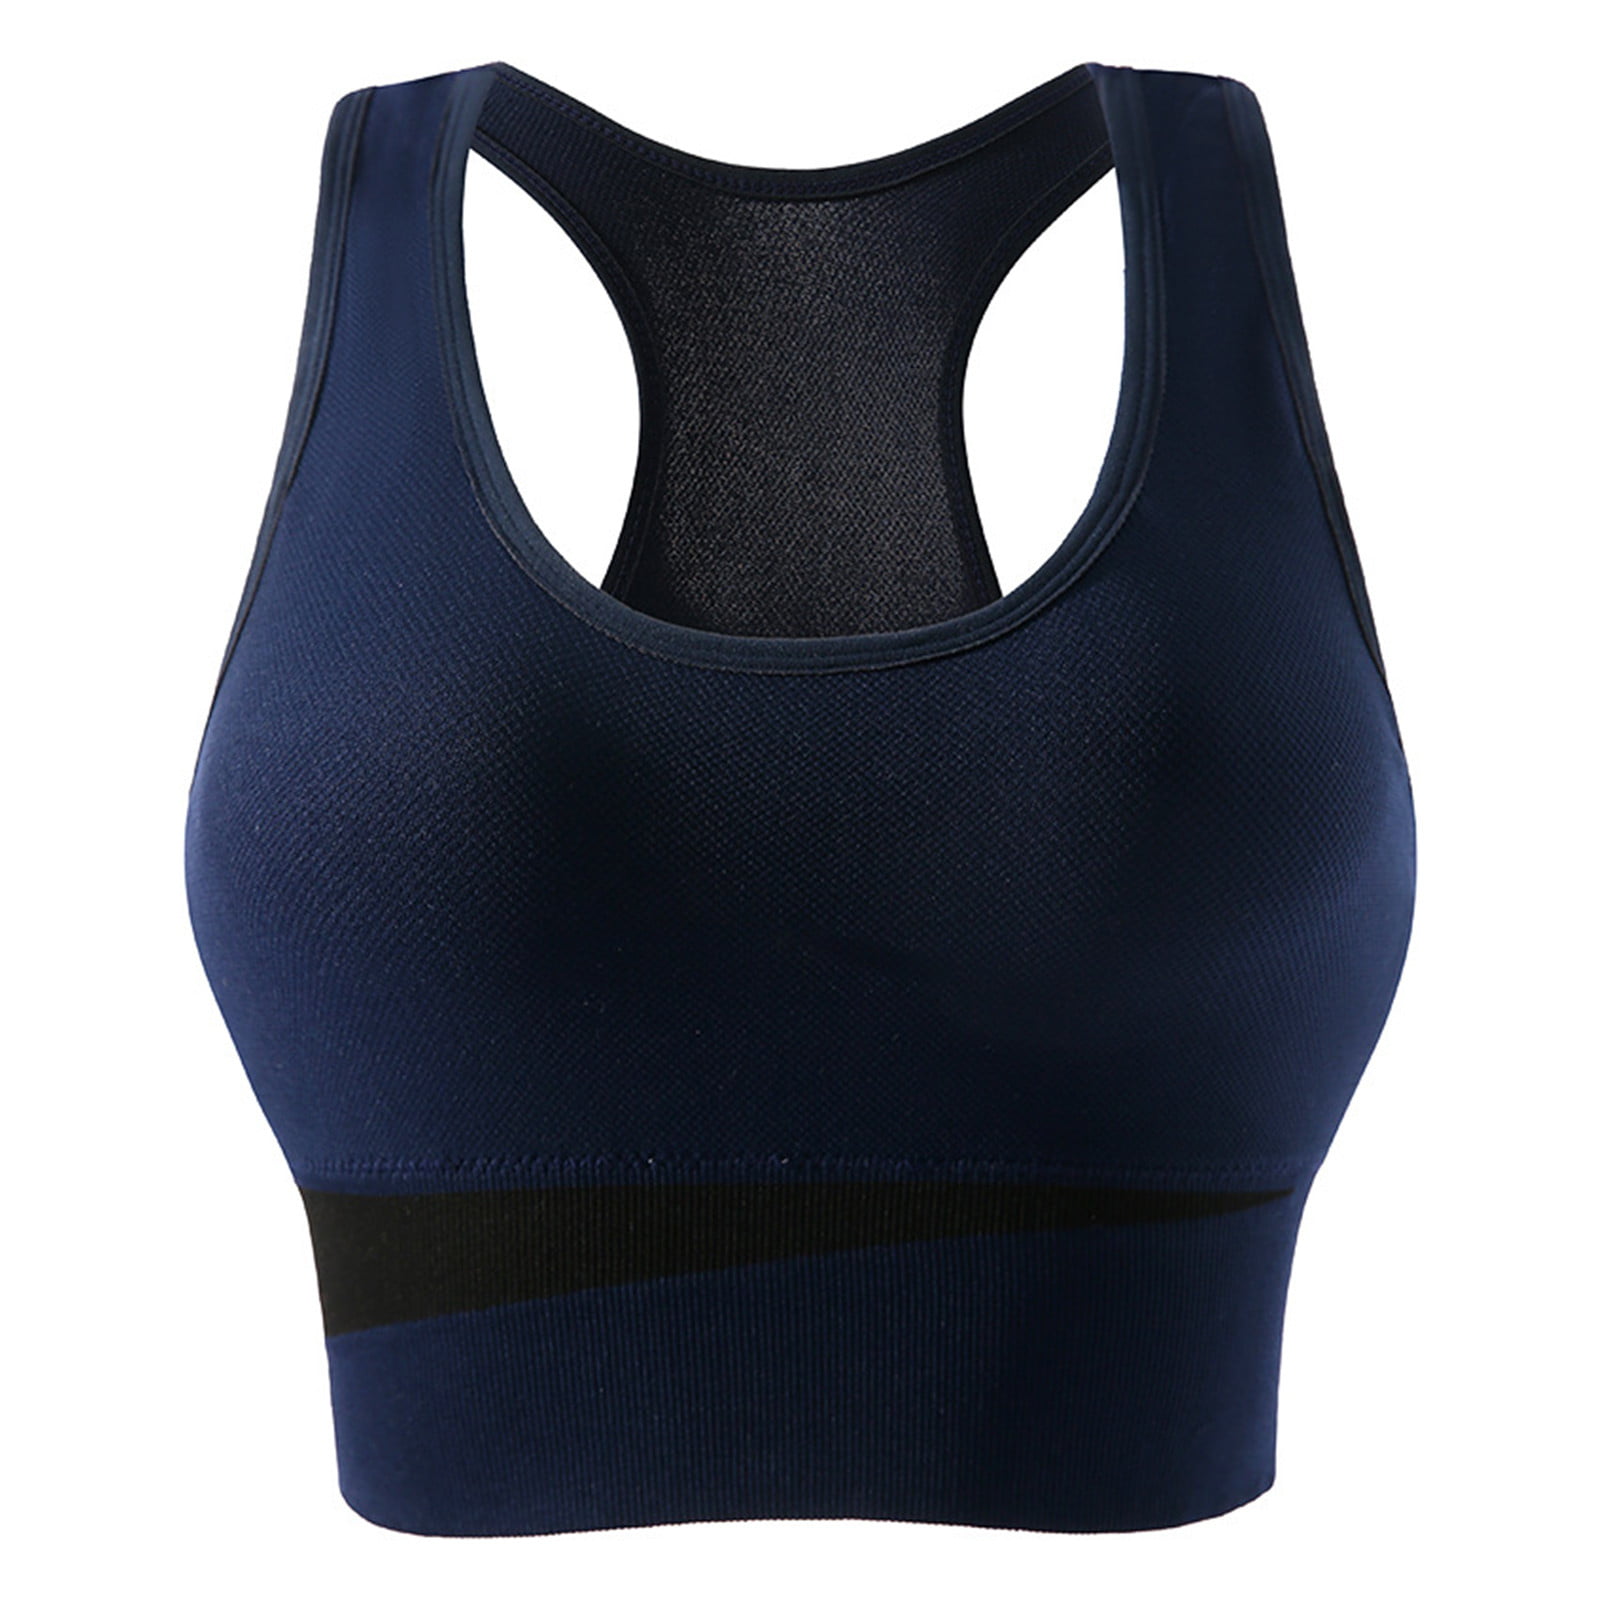 Women's Sports Bra Big Chest Small Running Shockproof Gathering No Steel  Ring Sports Bra Large Fitness Yoga Vest Tight Girdle Swimsuit